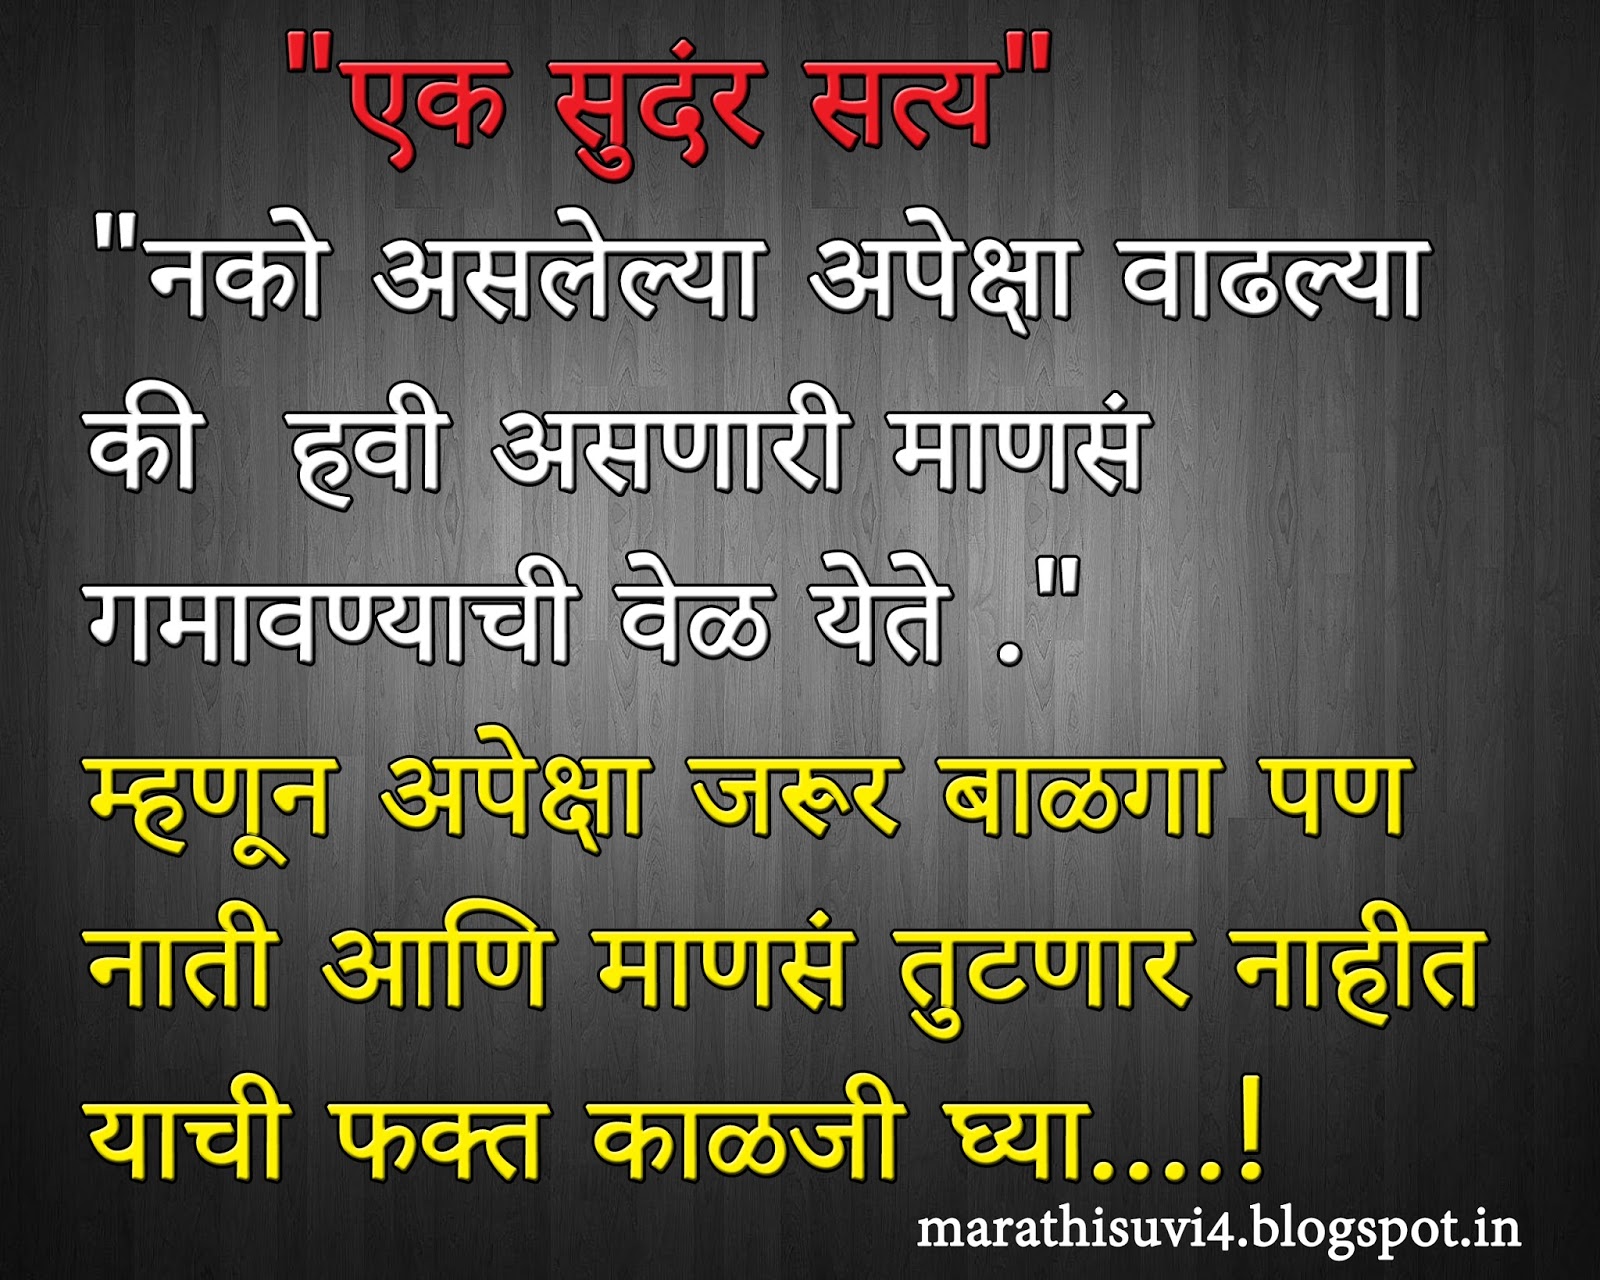 A beautiful truth of life in Marathi